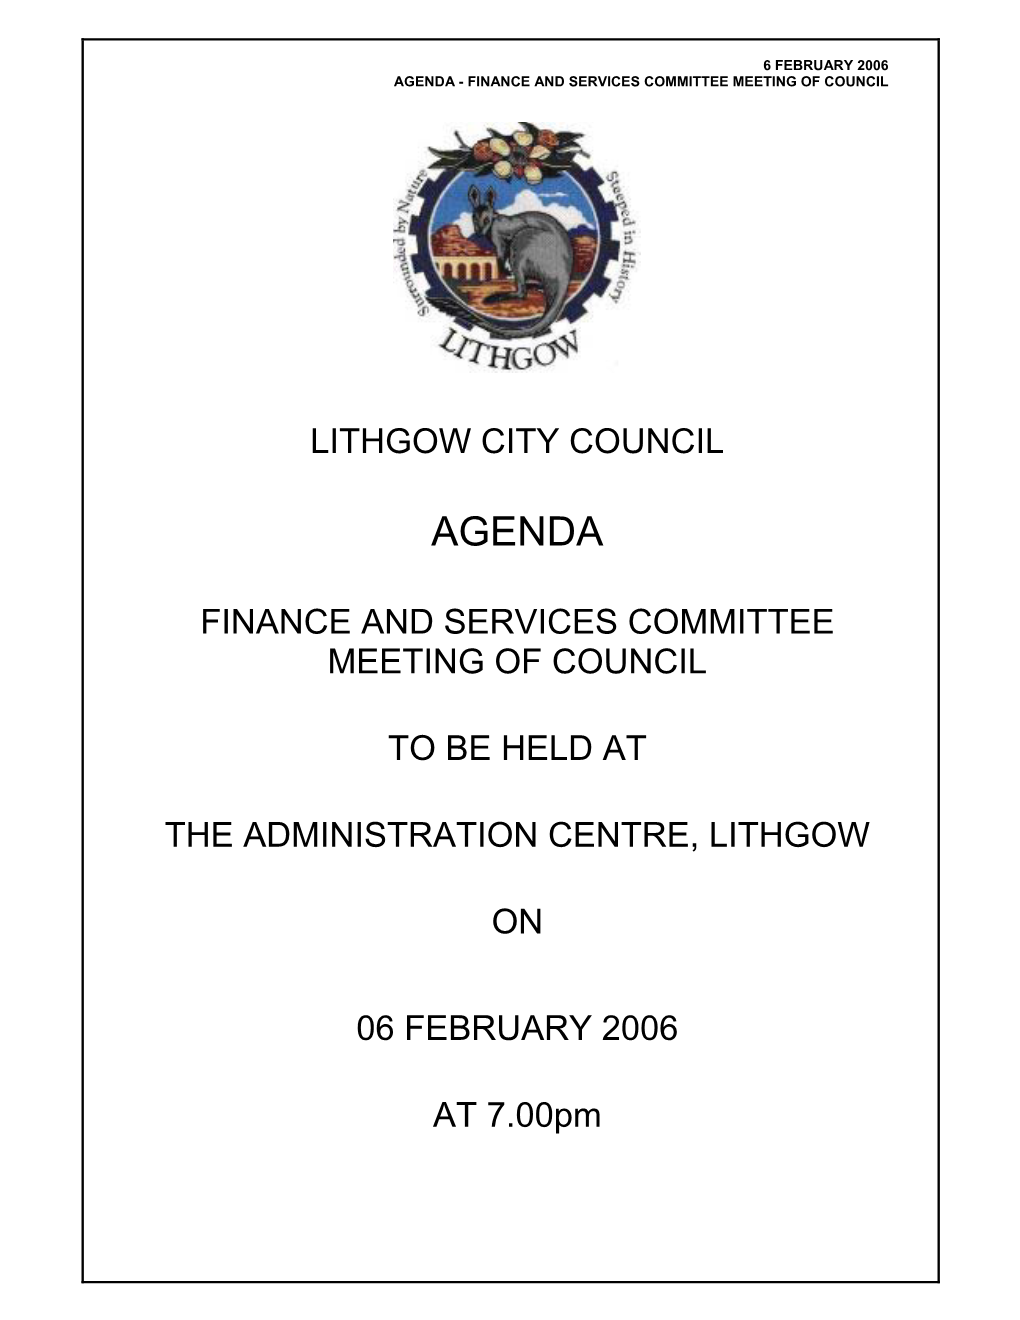 Agenda - Finance and Services Committee Meeting of Council